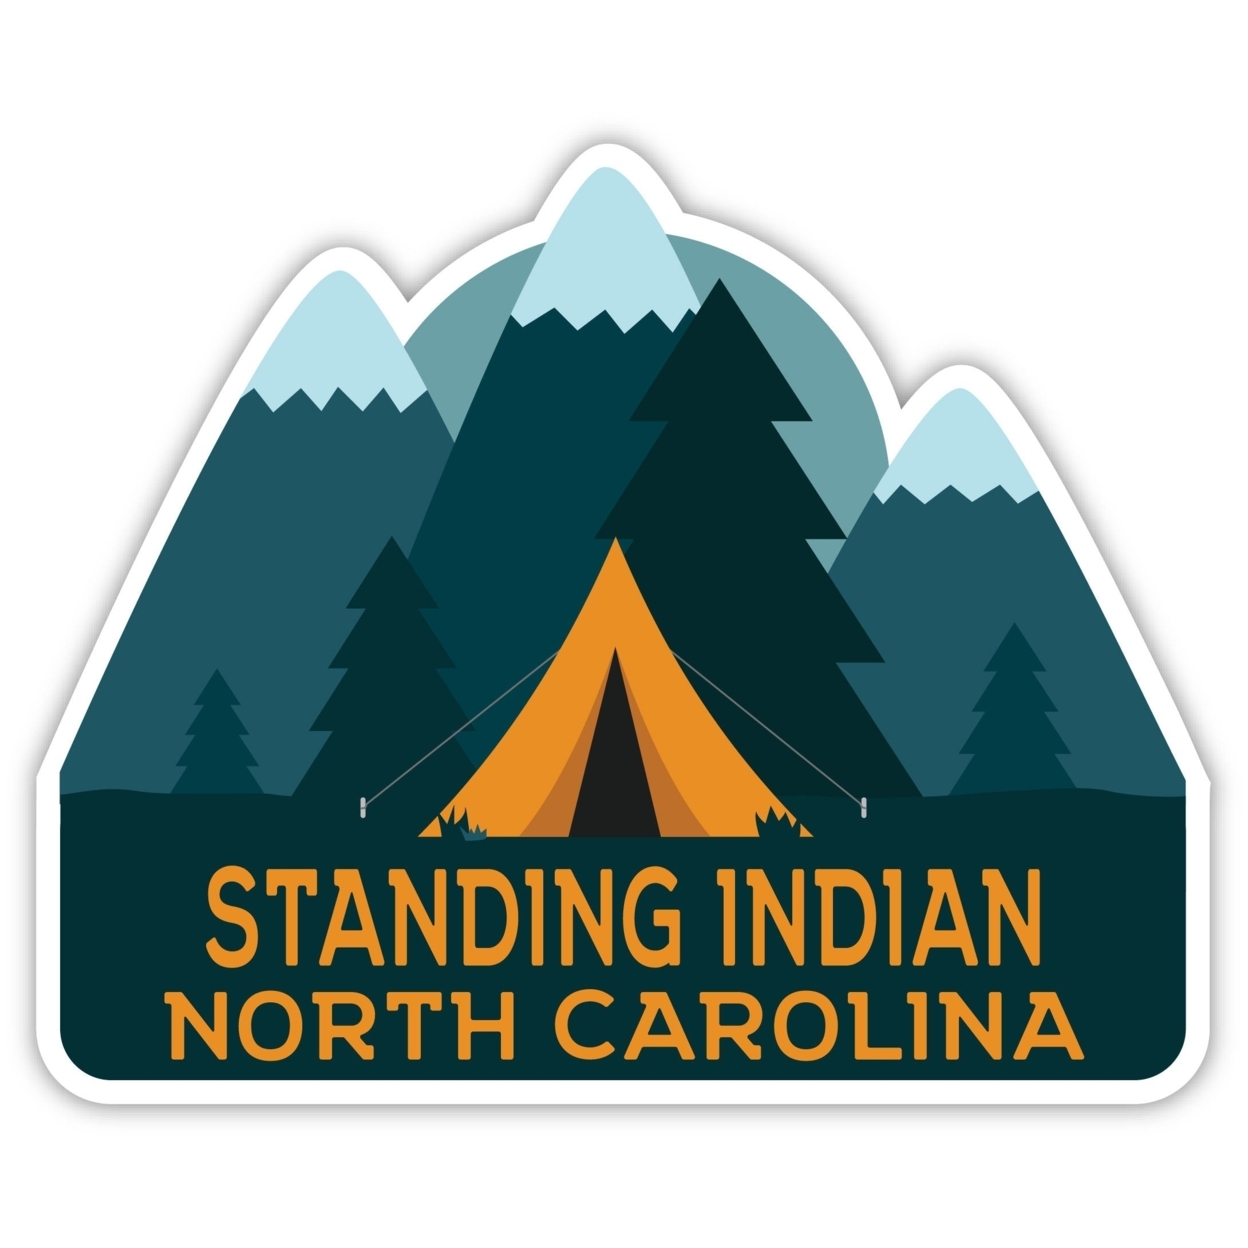 Standing Indian North Carolina Souvenir Decorative Stickers (Choose Theme And Size) - Single Unit, 2-Inch, Tent